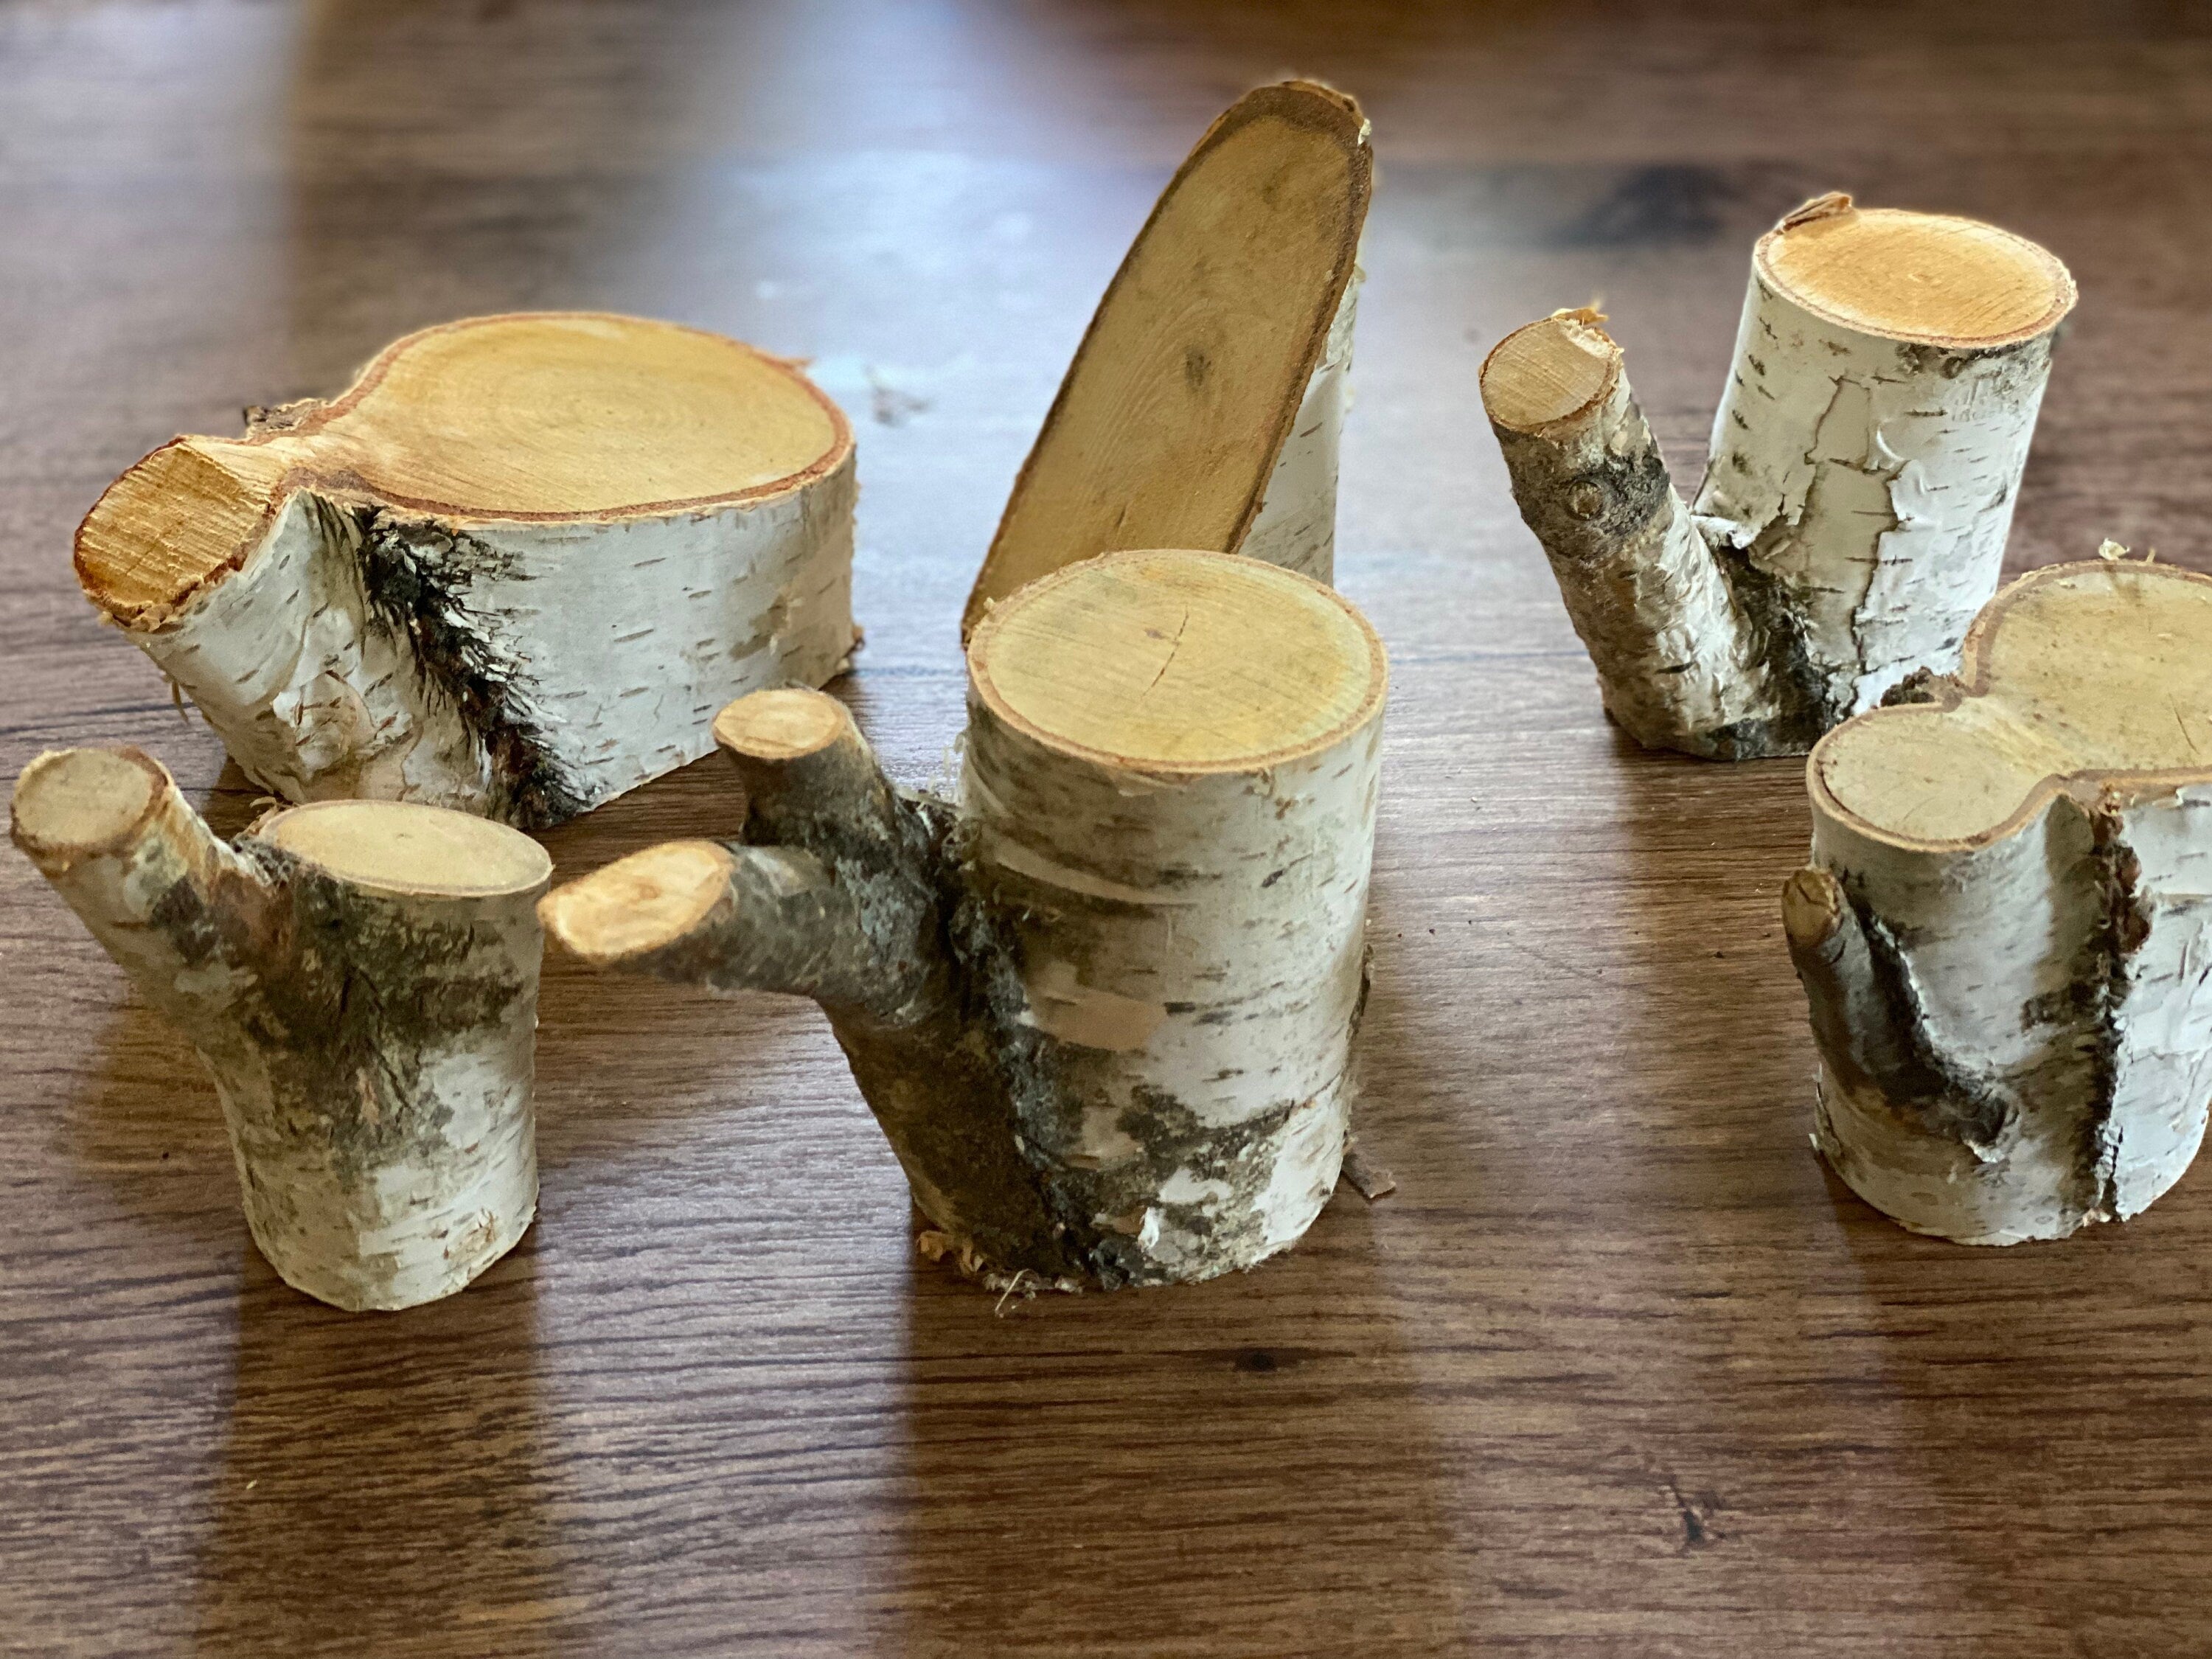 Six Unique White Birch Pieces, 6 Count, 2-5 Inches Long by 3-6 Inches Wide and 2-3.5 Inches Thick